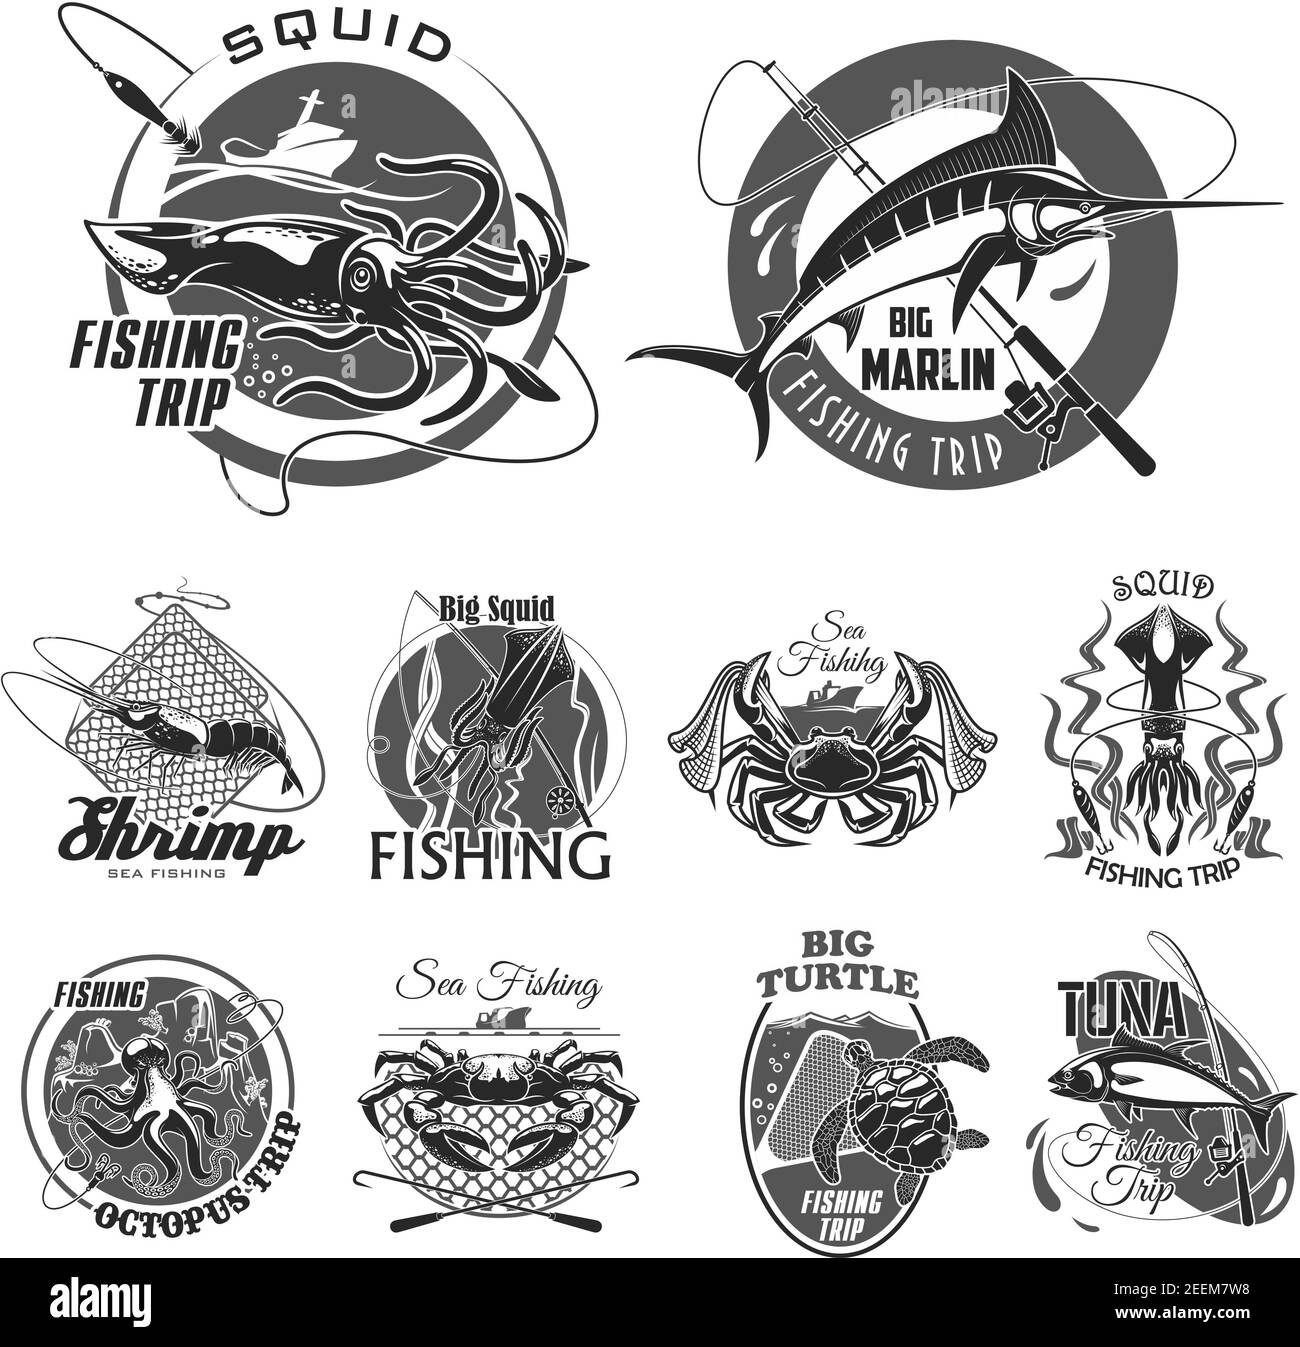 Fishing trip or fisherman club icons set of big fish on hook and tackle. Vector isolated badges of squid, turtle or shrimp and fishing rod with lure o Stock Vector